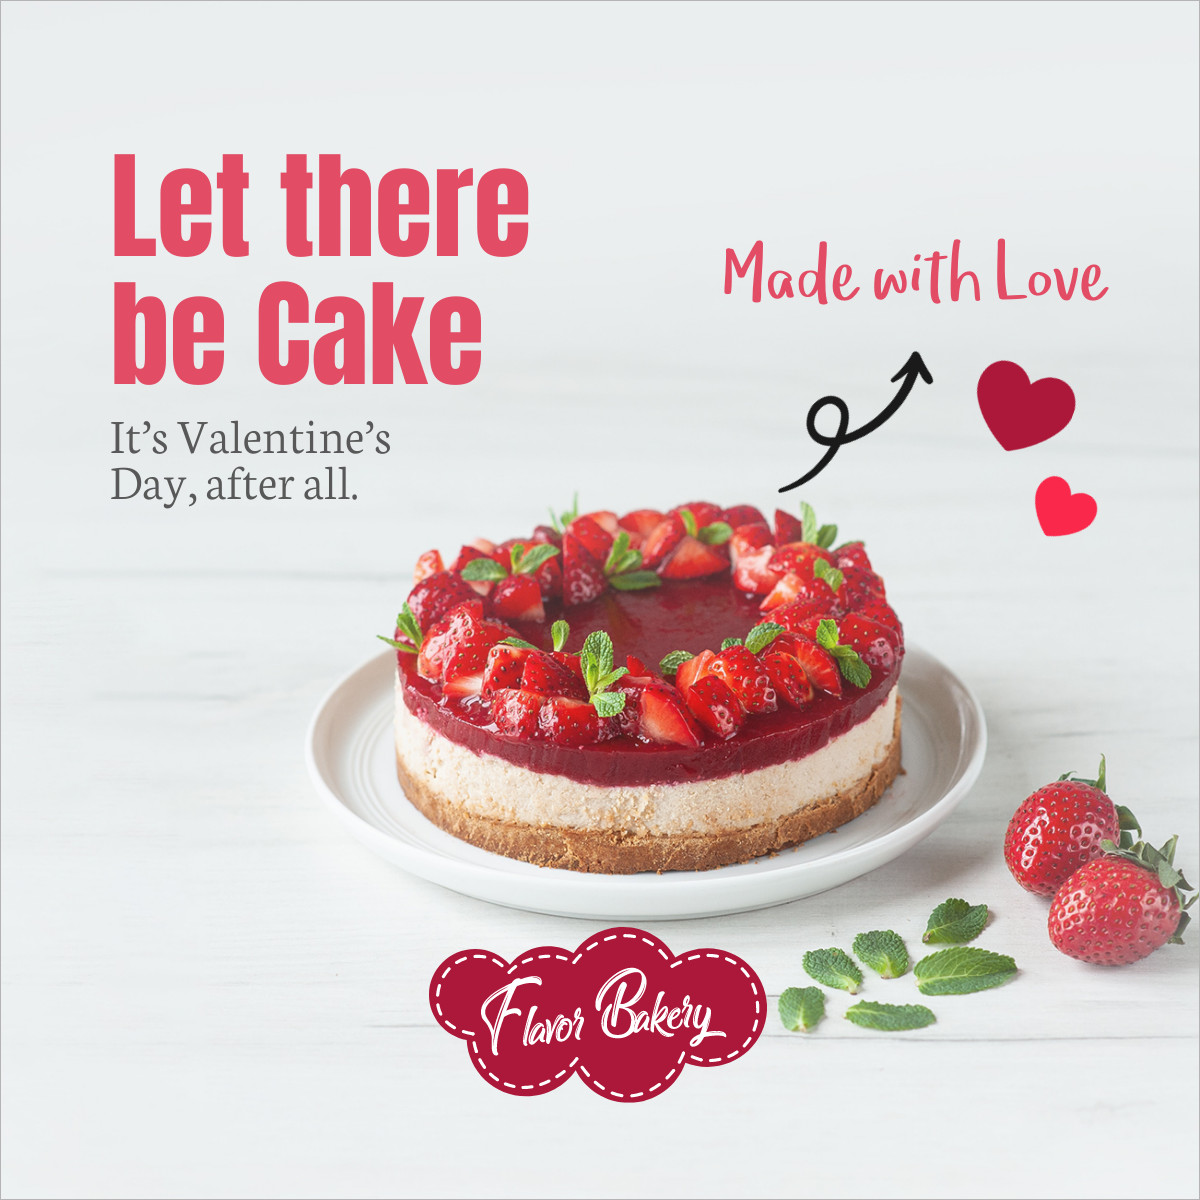 Let There Be Cake on Valentine's Day Inline Rectangle 300x250